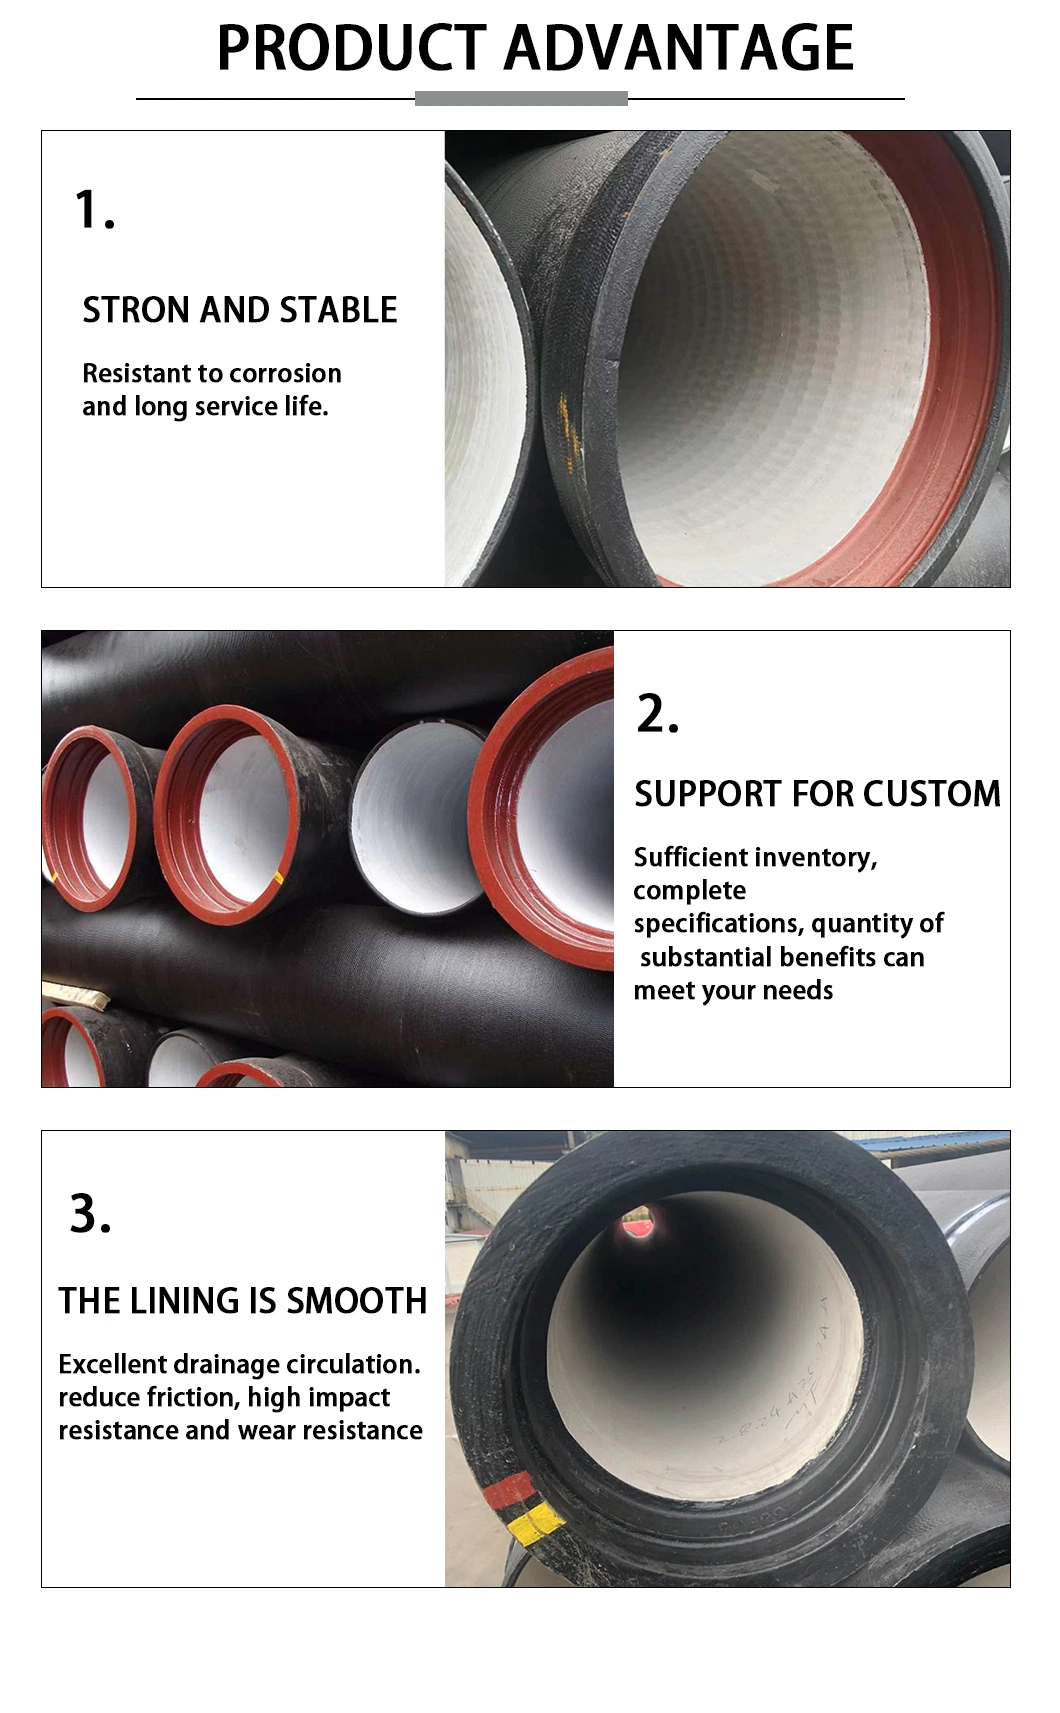 Factory Stock K9 C25 C30 C40 Class 450mm 800mm Ductile Iron Pipe for Sewage Disposal